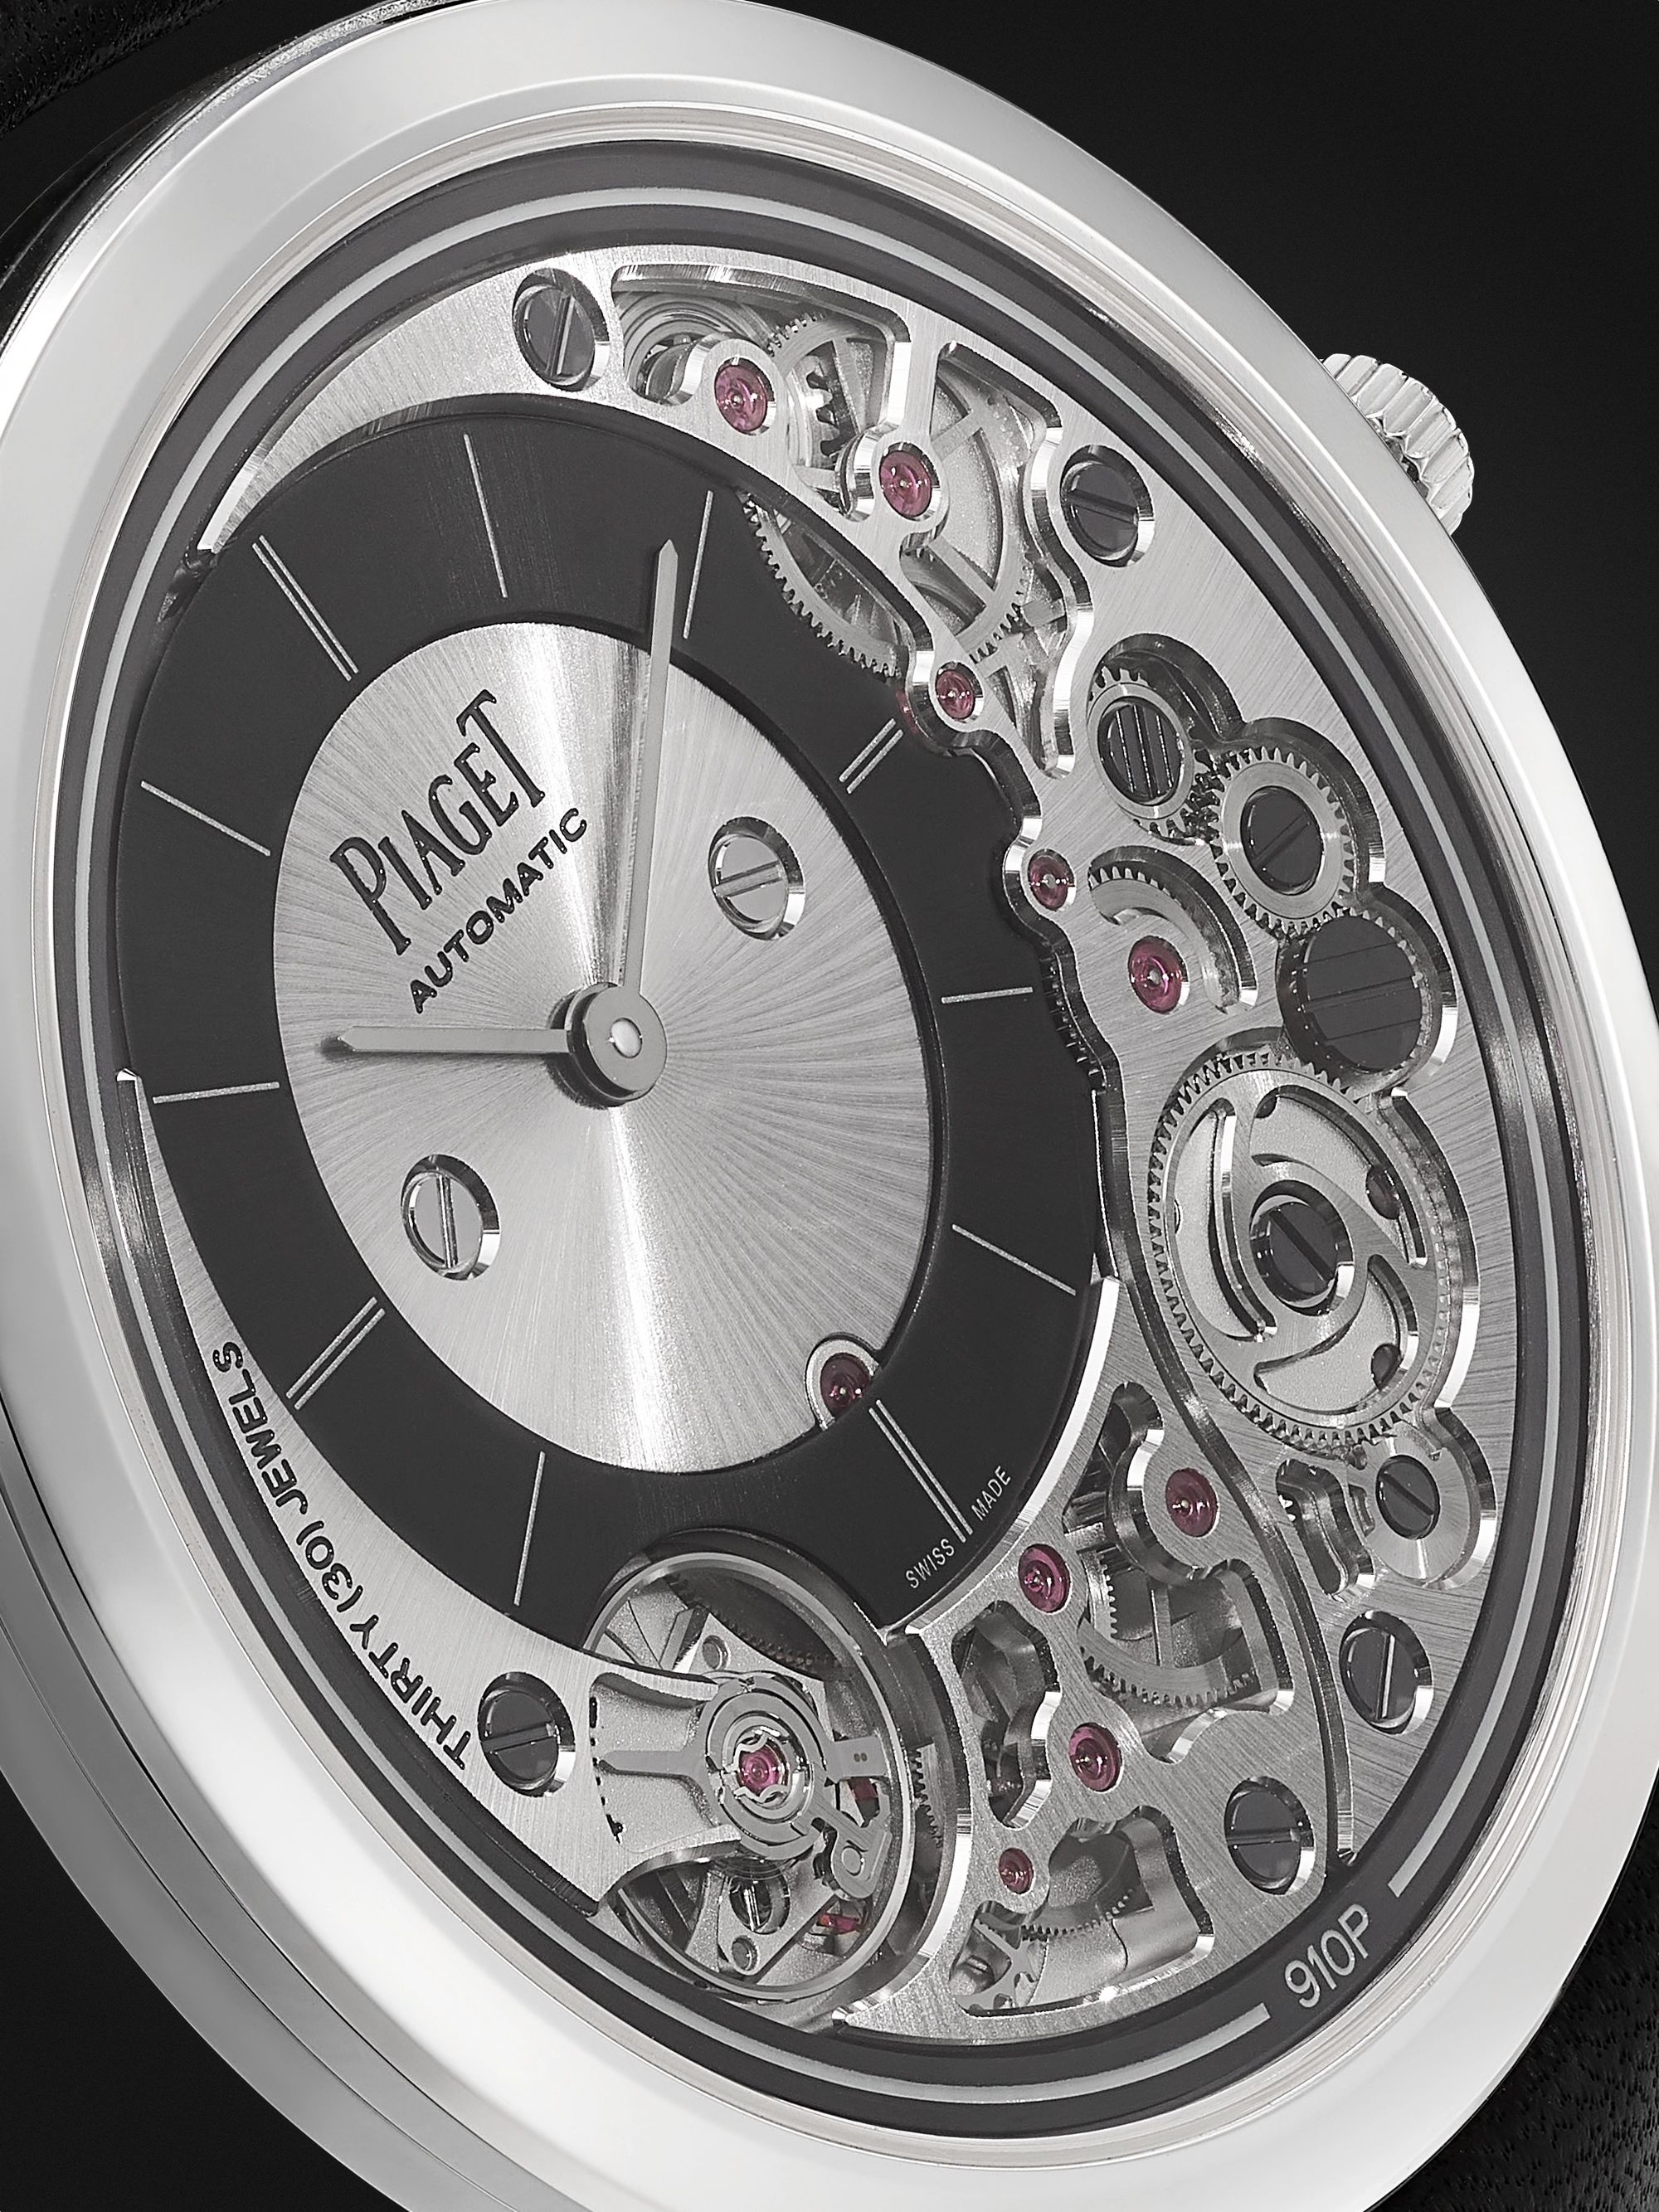 PIAGET Altiplano Ultimate Automatic 41mm 18-Karat White Gold and Leather Watch, Ref. No. G0A43121